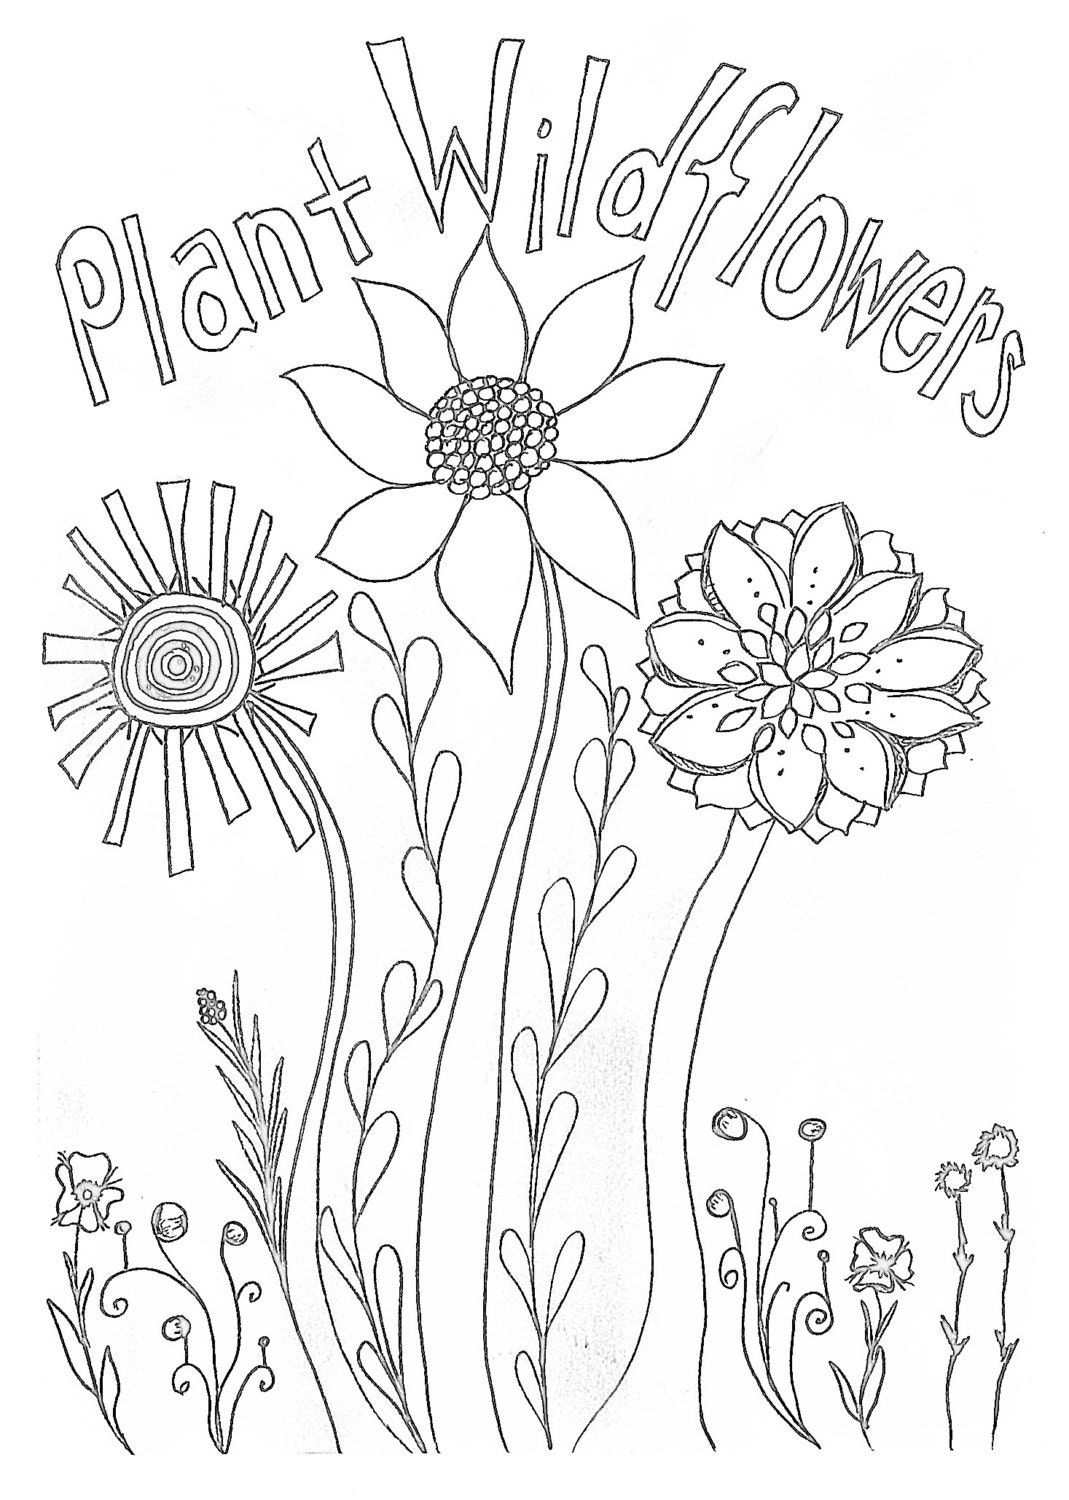 Wildflowers Printable Coloring Page Download by RootinForYourLife